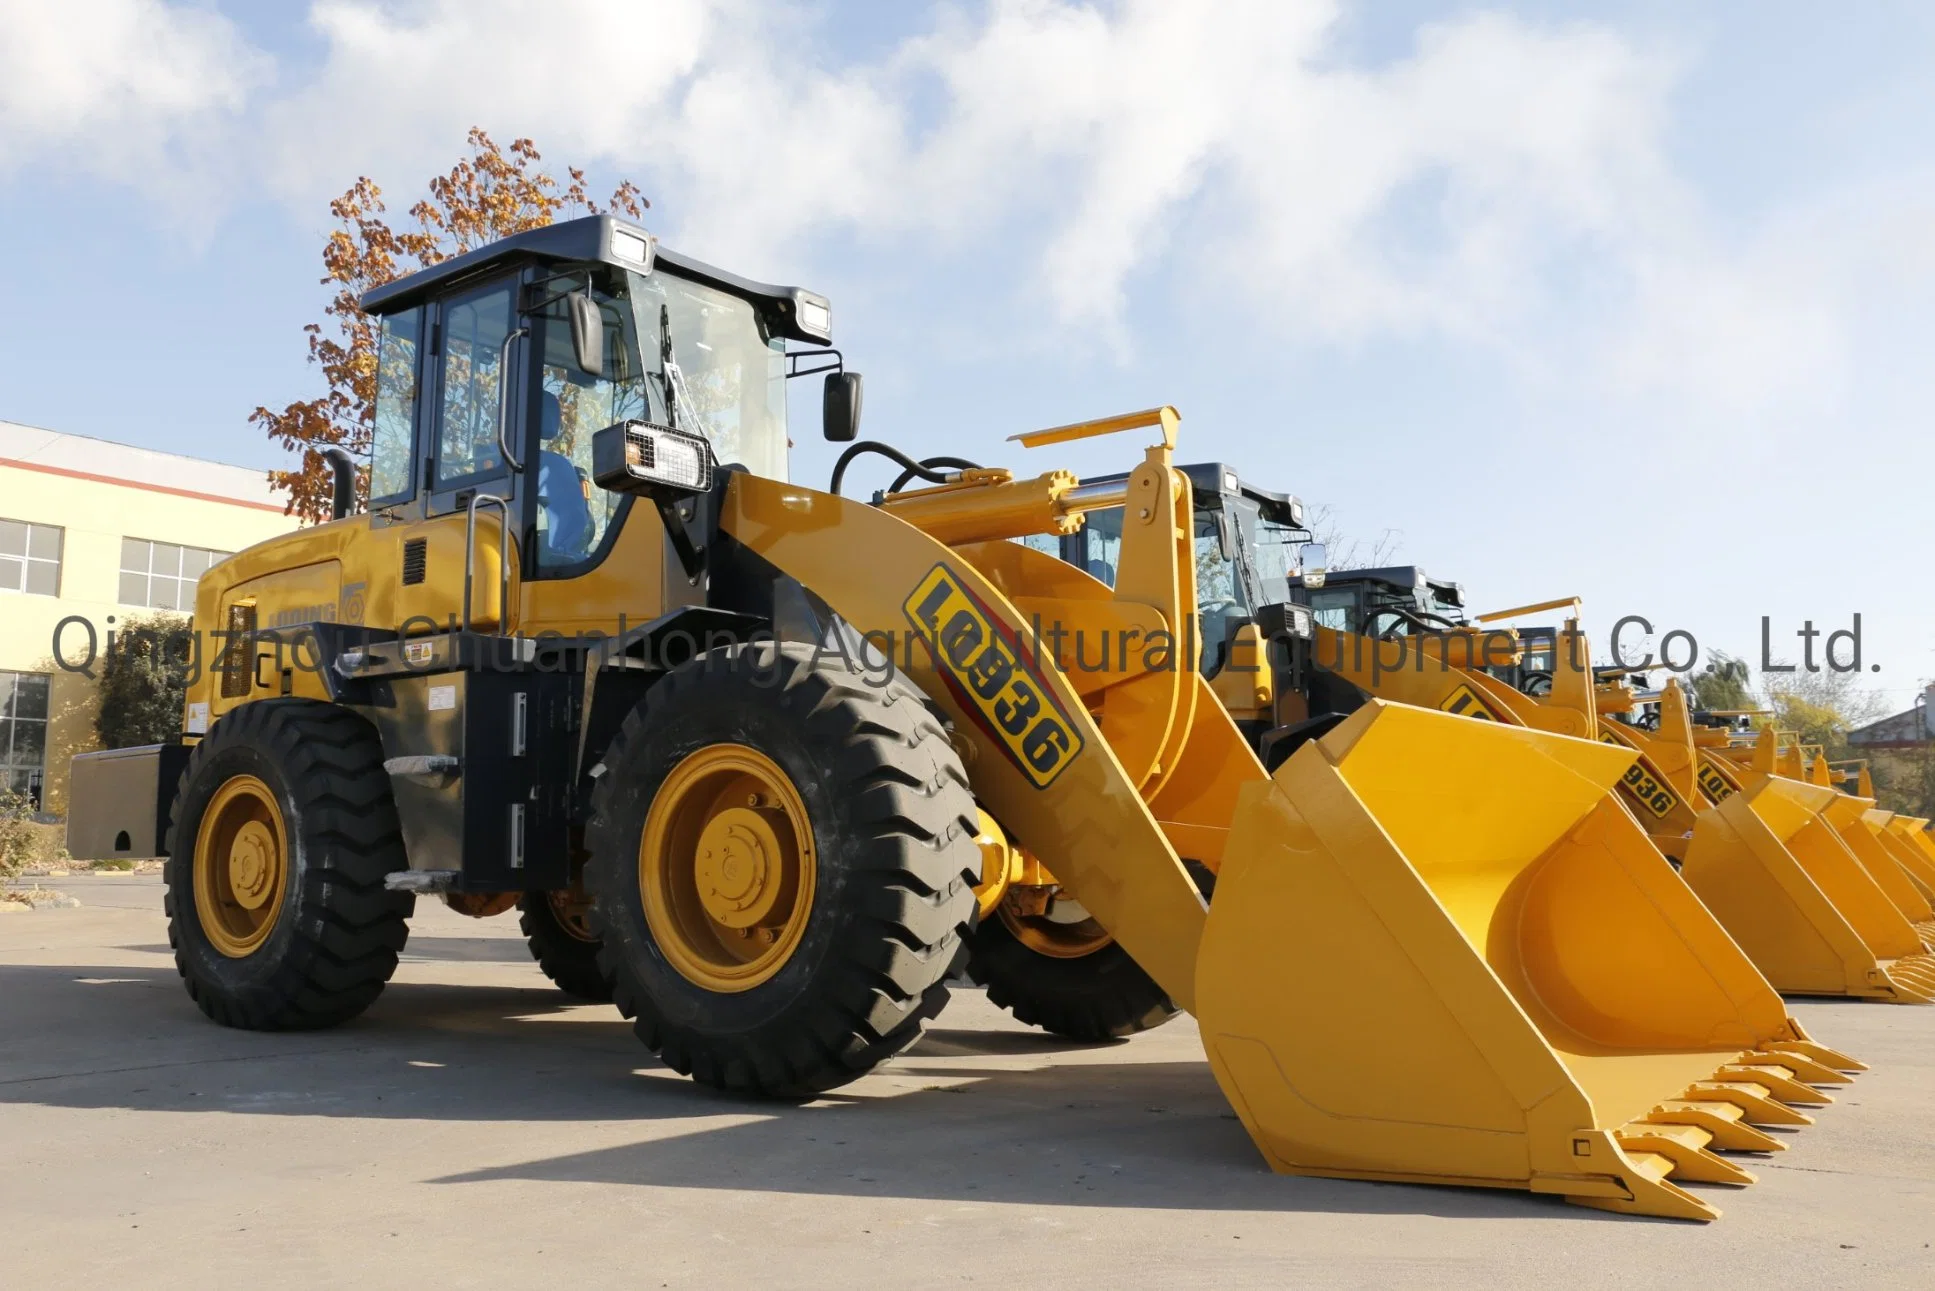 Small/Mini/Compact Agricultural/Construction/Farm Front End Shovel Wheel Loader with CE/ISO/Eac Certificate